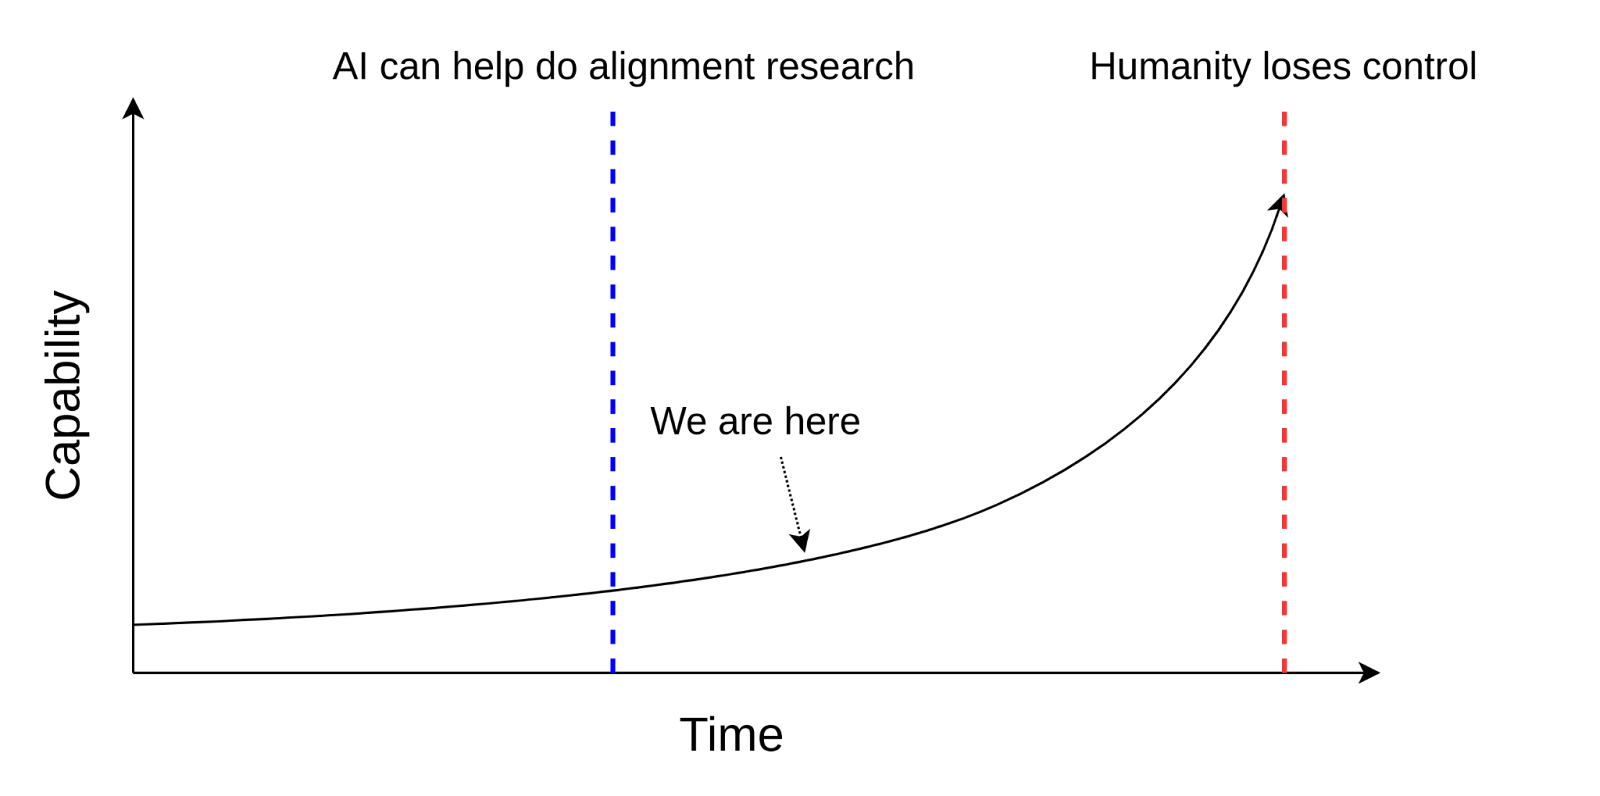 graph showing that we are at the point between when AI can help do alignment research, and when humanity loses control.